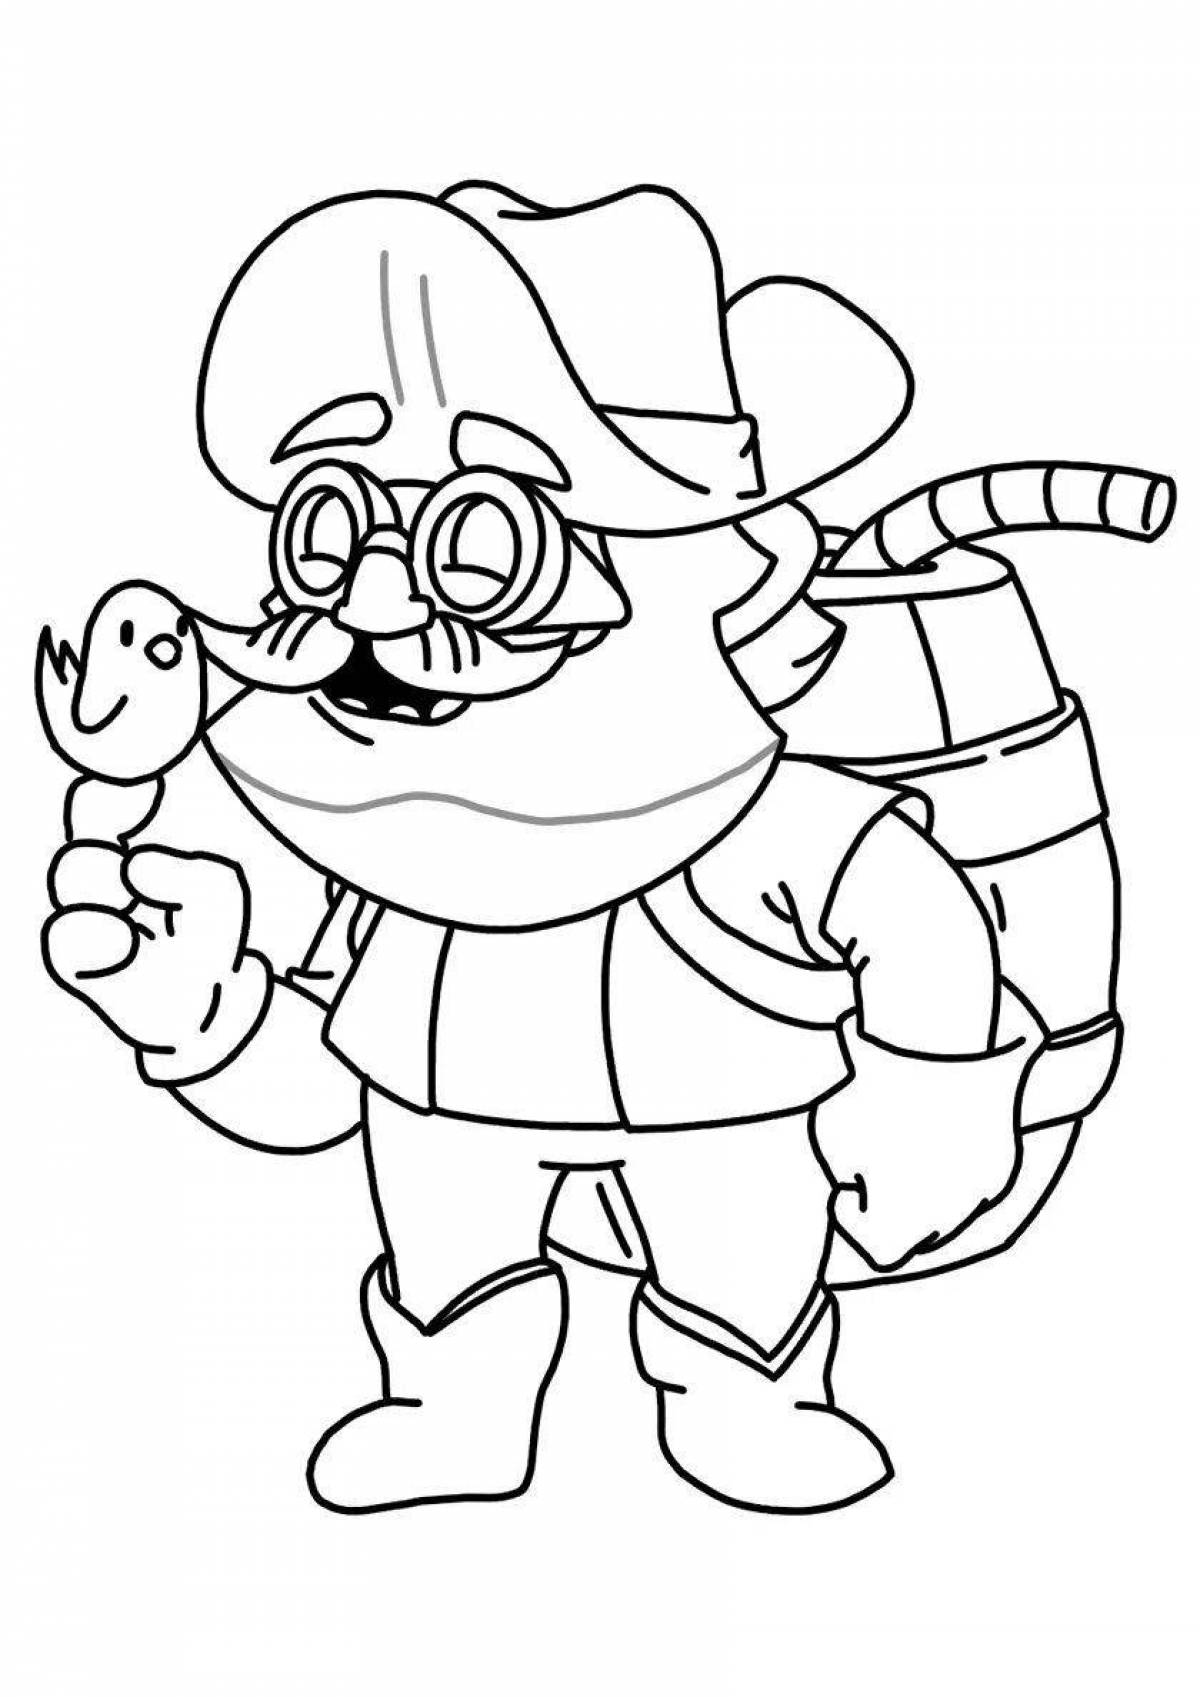 Colorful dynamike coloring page